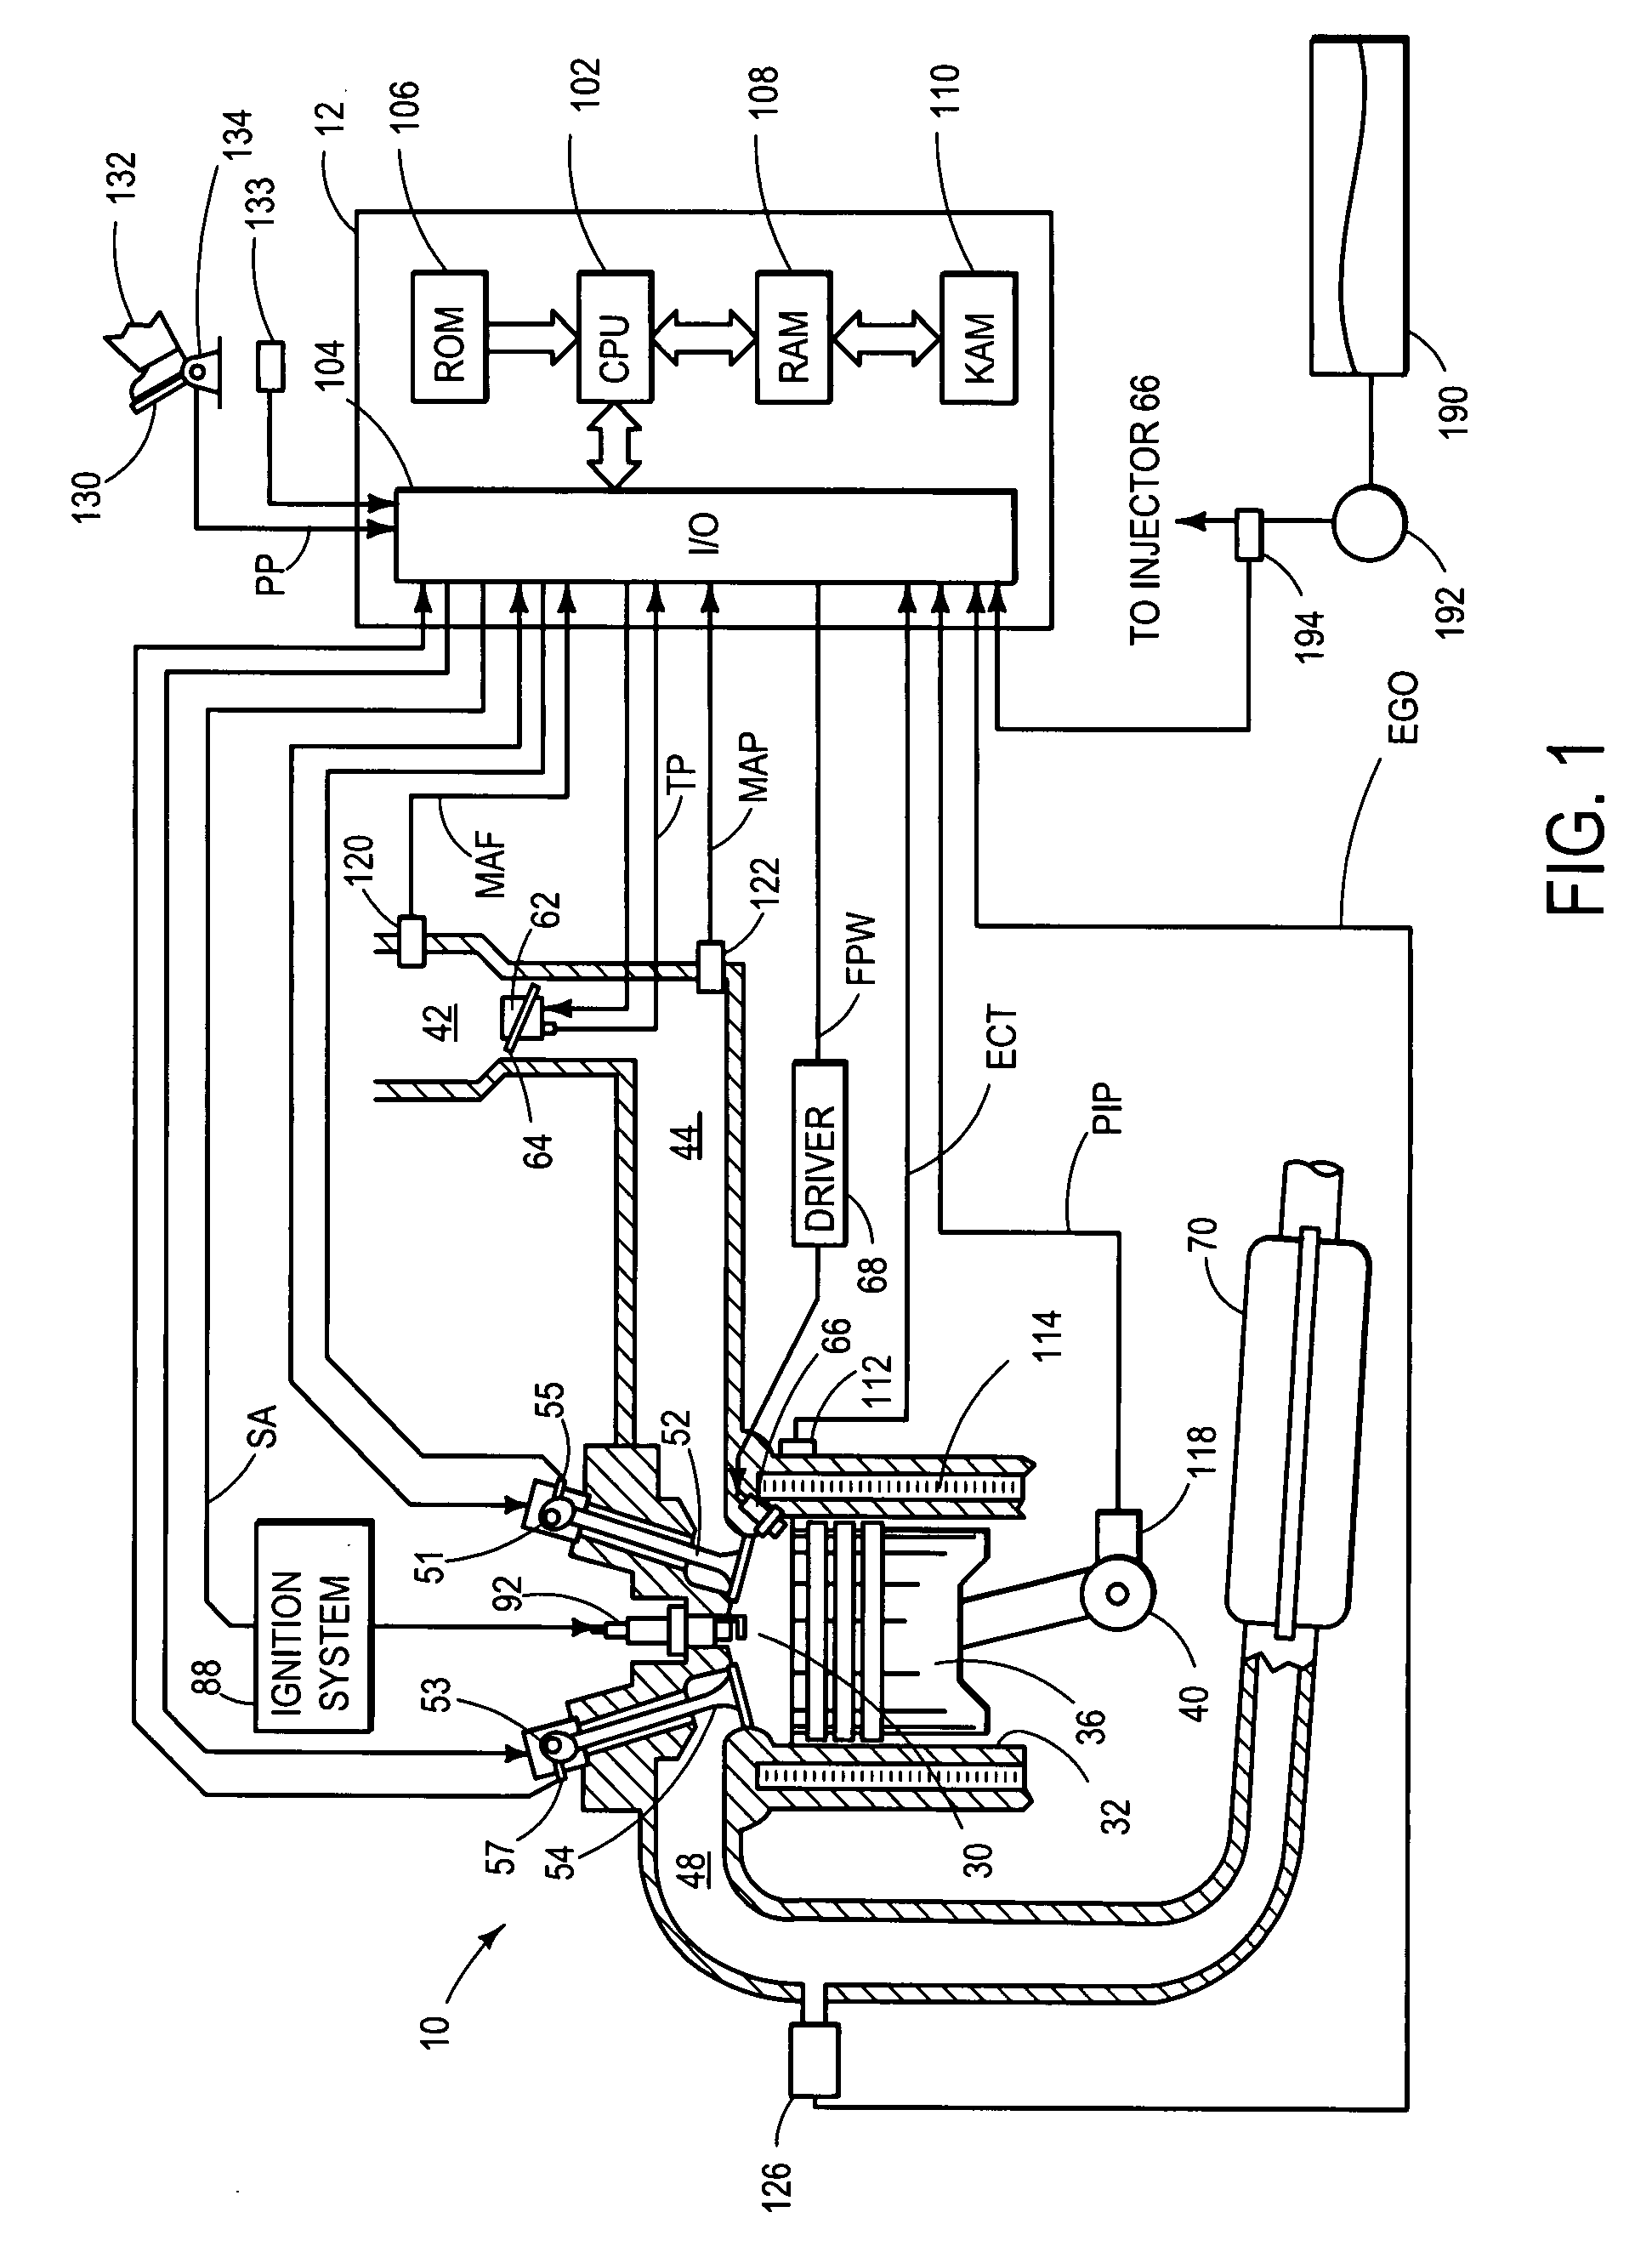 Approach for improved fuel vaporization in a directly injected internal combustion engine